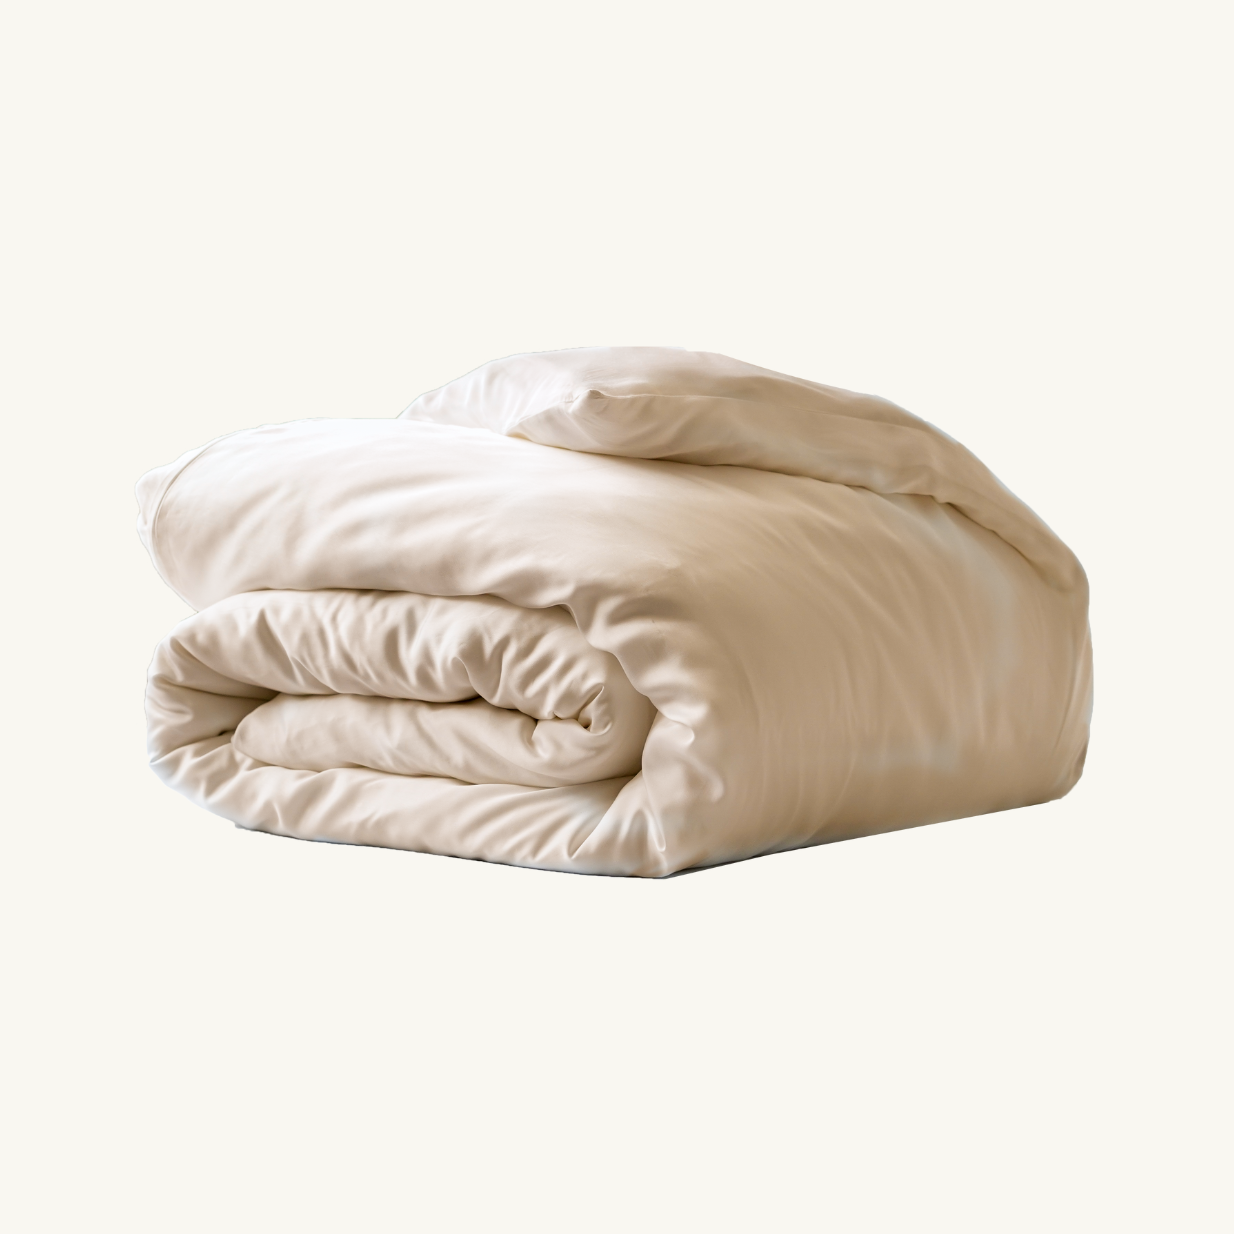 Sand Taupe TENCEL Duvet Cover Quilt Cover Buy quilt cover Singapore and duvet cover Singapore at Weavve Home, know what is quilt cover, what is a duvet cover. Best Bed Sheets Singapore and Luxury Hotel Sheets. 